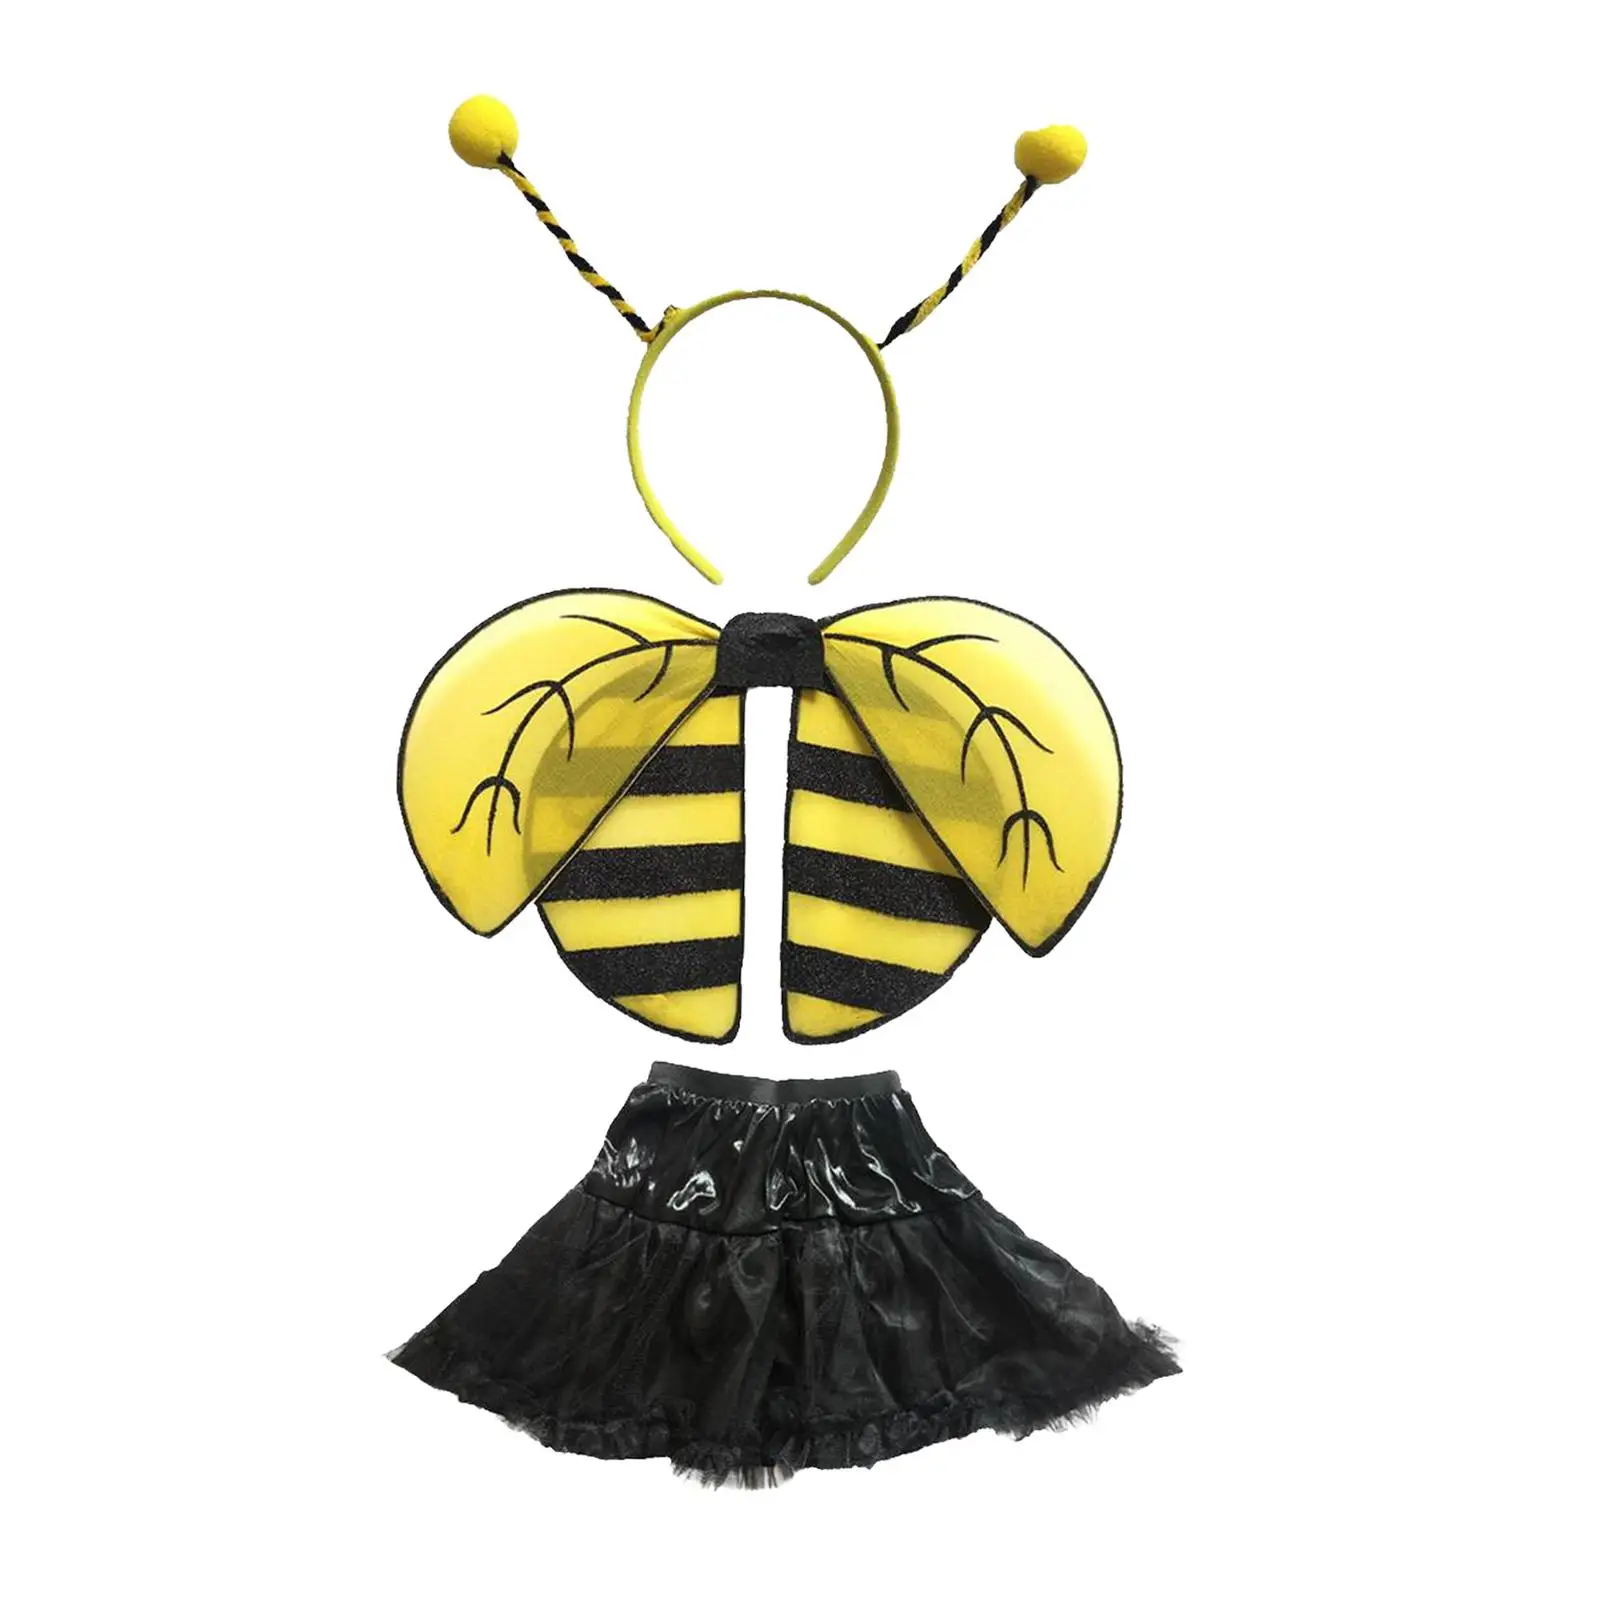 Bee Costume Kit Women Photo Props Cosplay Headband Fairy Wing Cv Masquerade Party Favors Role Festival Kids Girls